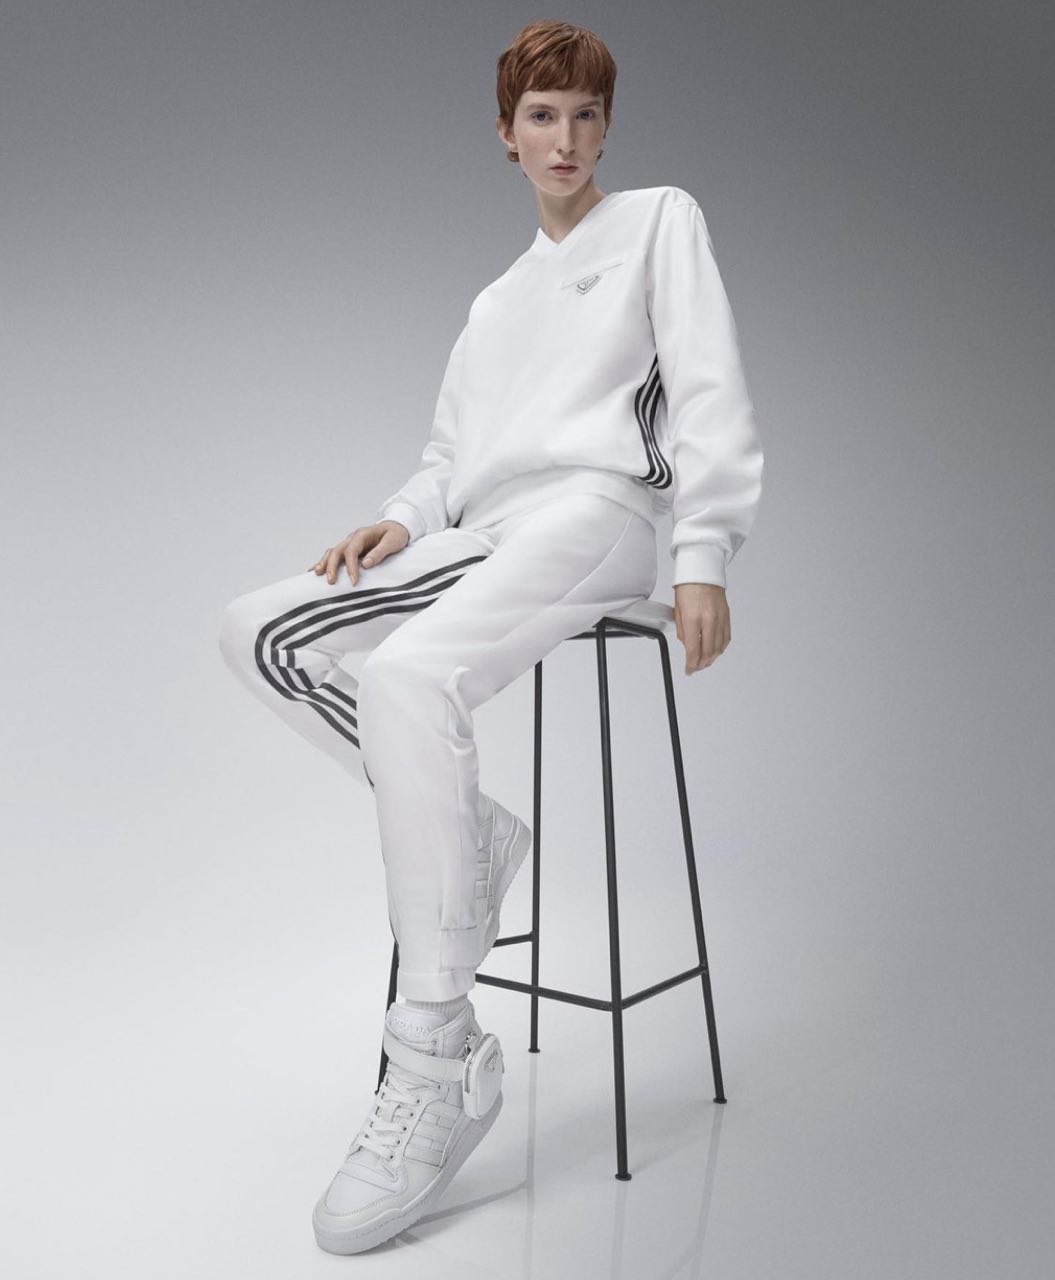 ADIDAS X PRADA COLLABORATE ON NEW SUSTAINABLE RE-NYLON COLLECTION – Shout